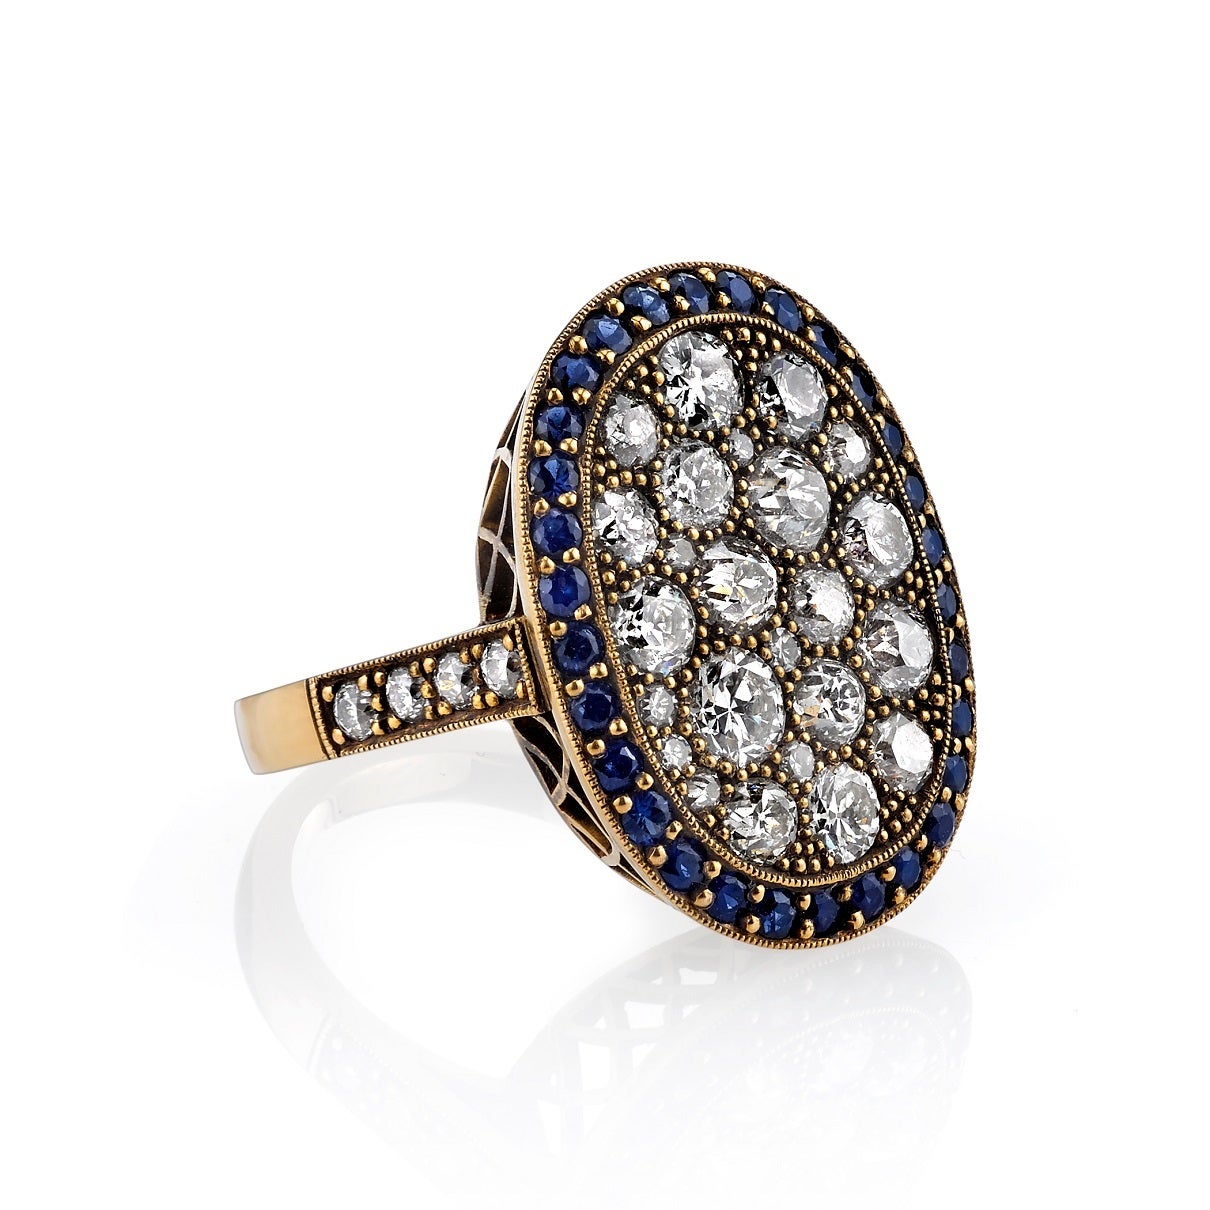 2.66ctw old European, old Mine, Round Brilliant, Single cut and vintage Cushion cut diamonds with 0.85ctw Sapphire surround set in hand crafted 18K oxidized yellow gold mounting. Prices may vary according to total diamond weight. Measurements 22.5mm